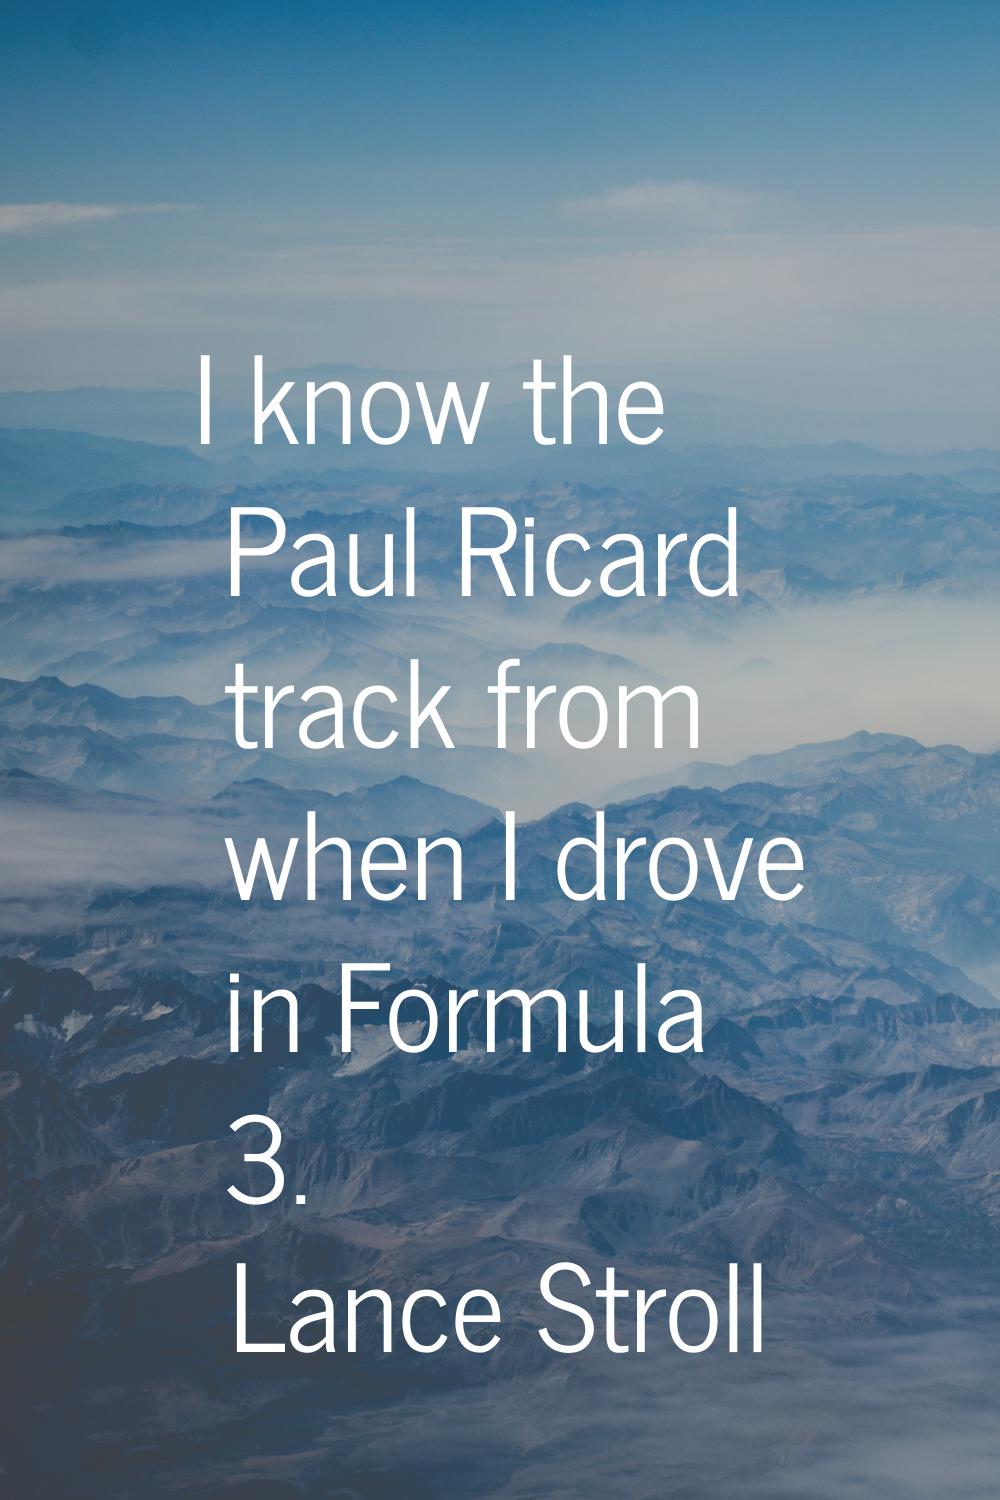 I know the Paul Ricard track from when I drove in Formula 3.